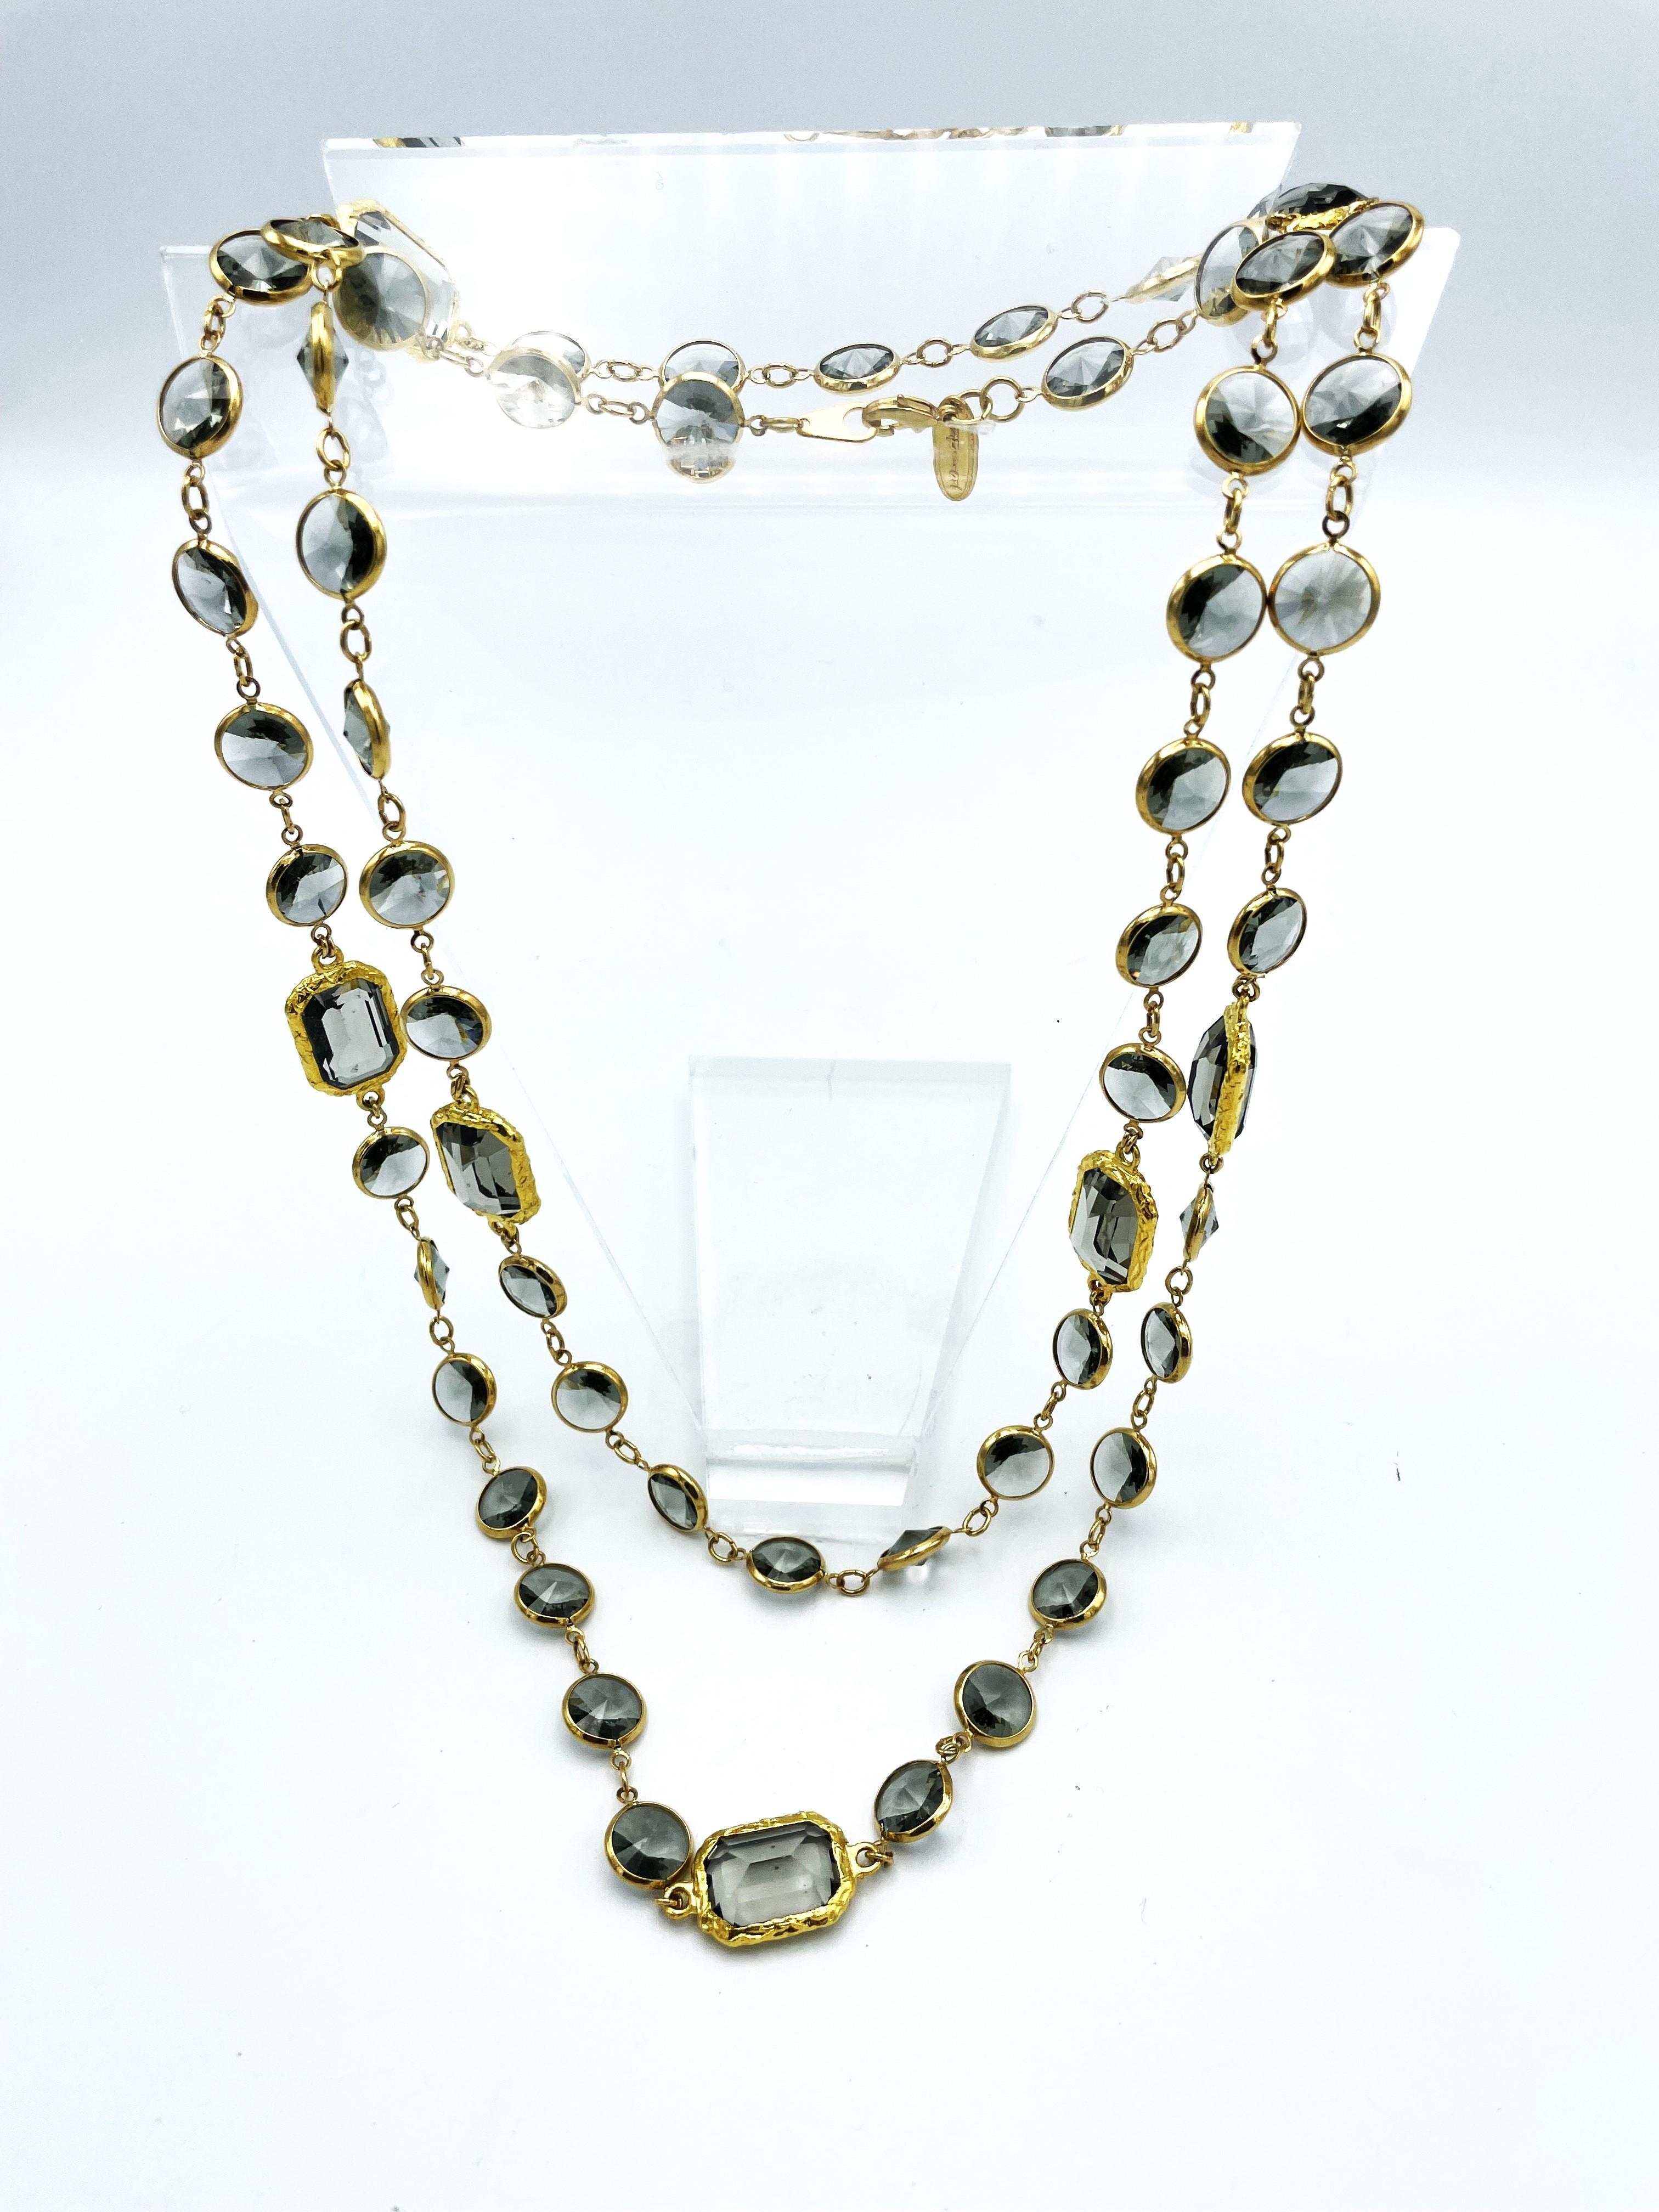 Modern A new Chicklet necklace like the Chanel, Swarovski gray crystals, gold plated 